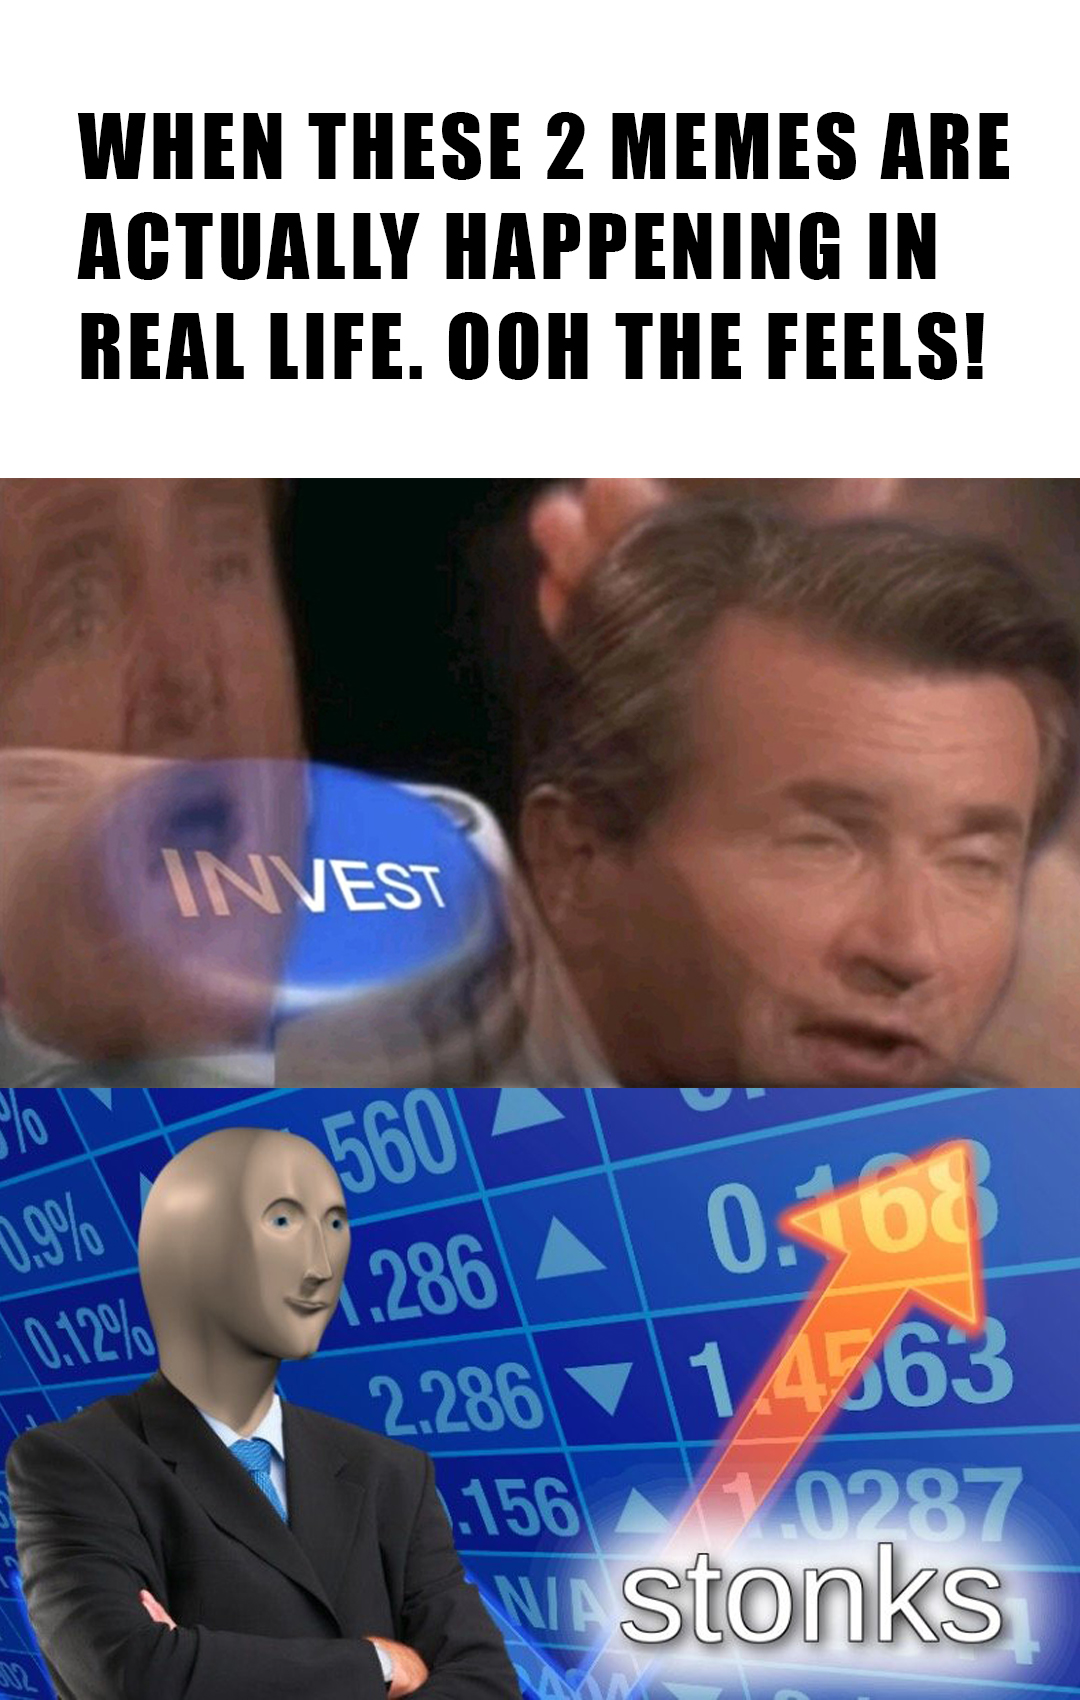 stonks meme - When These 2 Memes Are Actually Happening In Real Life. Ooh The Feels! Invest 30 560 0.9% .286 0.468 0.12% 2.286 1.4563 1.156 0287 w stonks